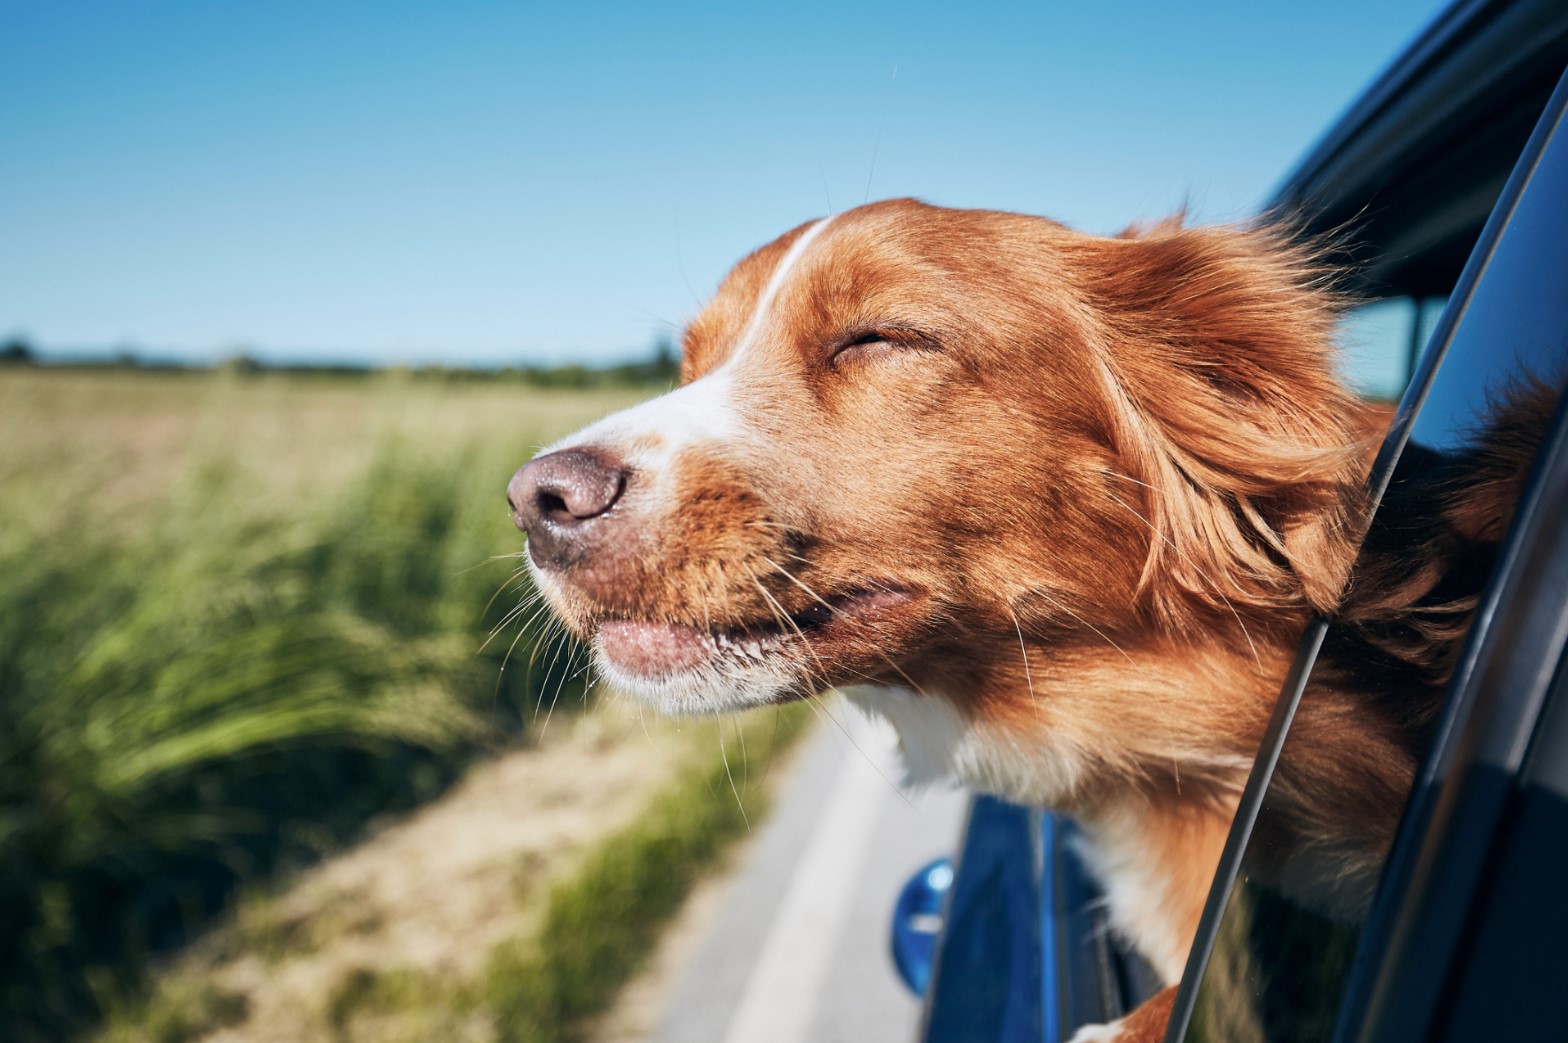 Is Your Vehicle Ready For Your Summer Road Trip?